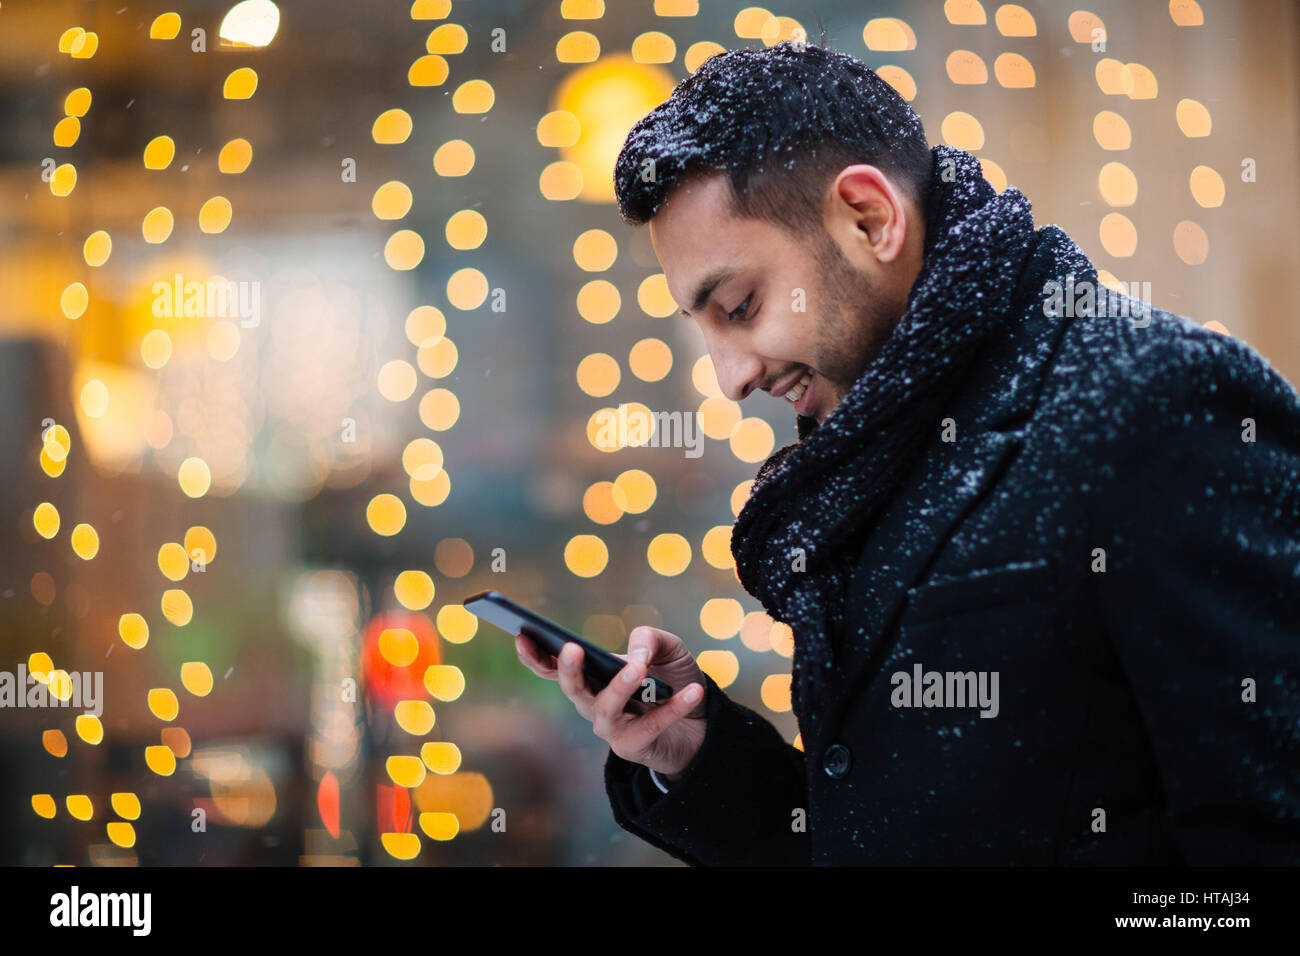 Heartwarming image of young Arabic man stopping to read pleasant text message in the streets of winter city on background of store window decorated by Stock Photo